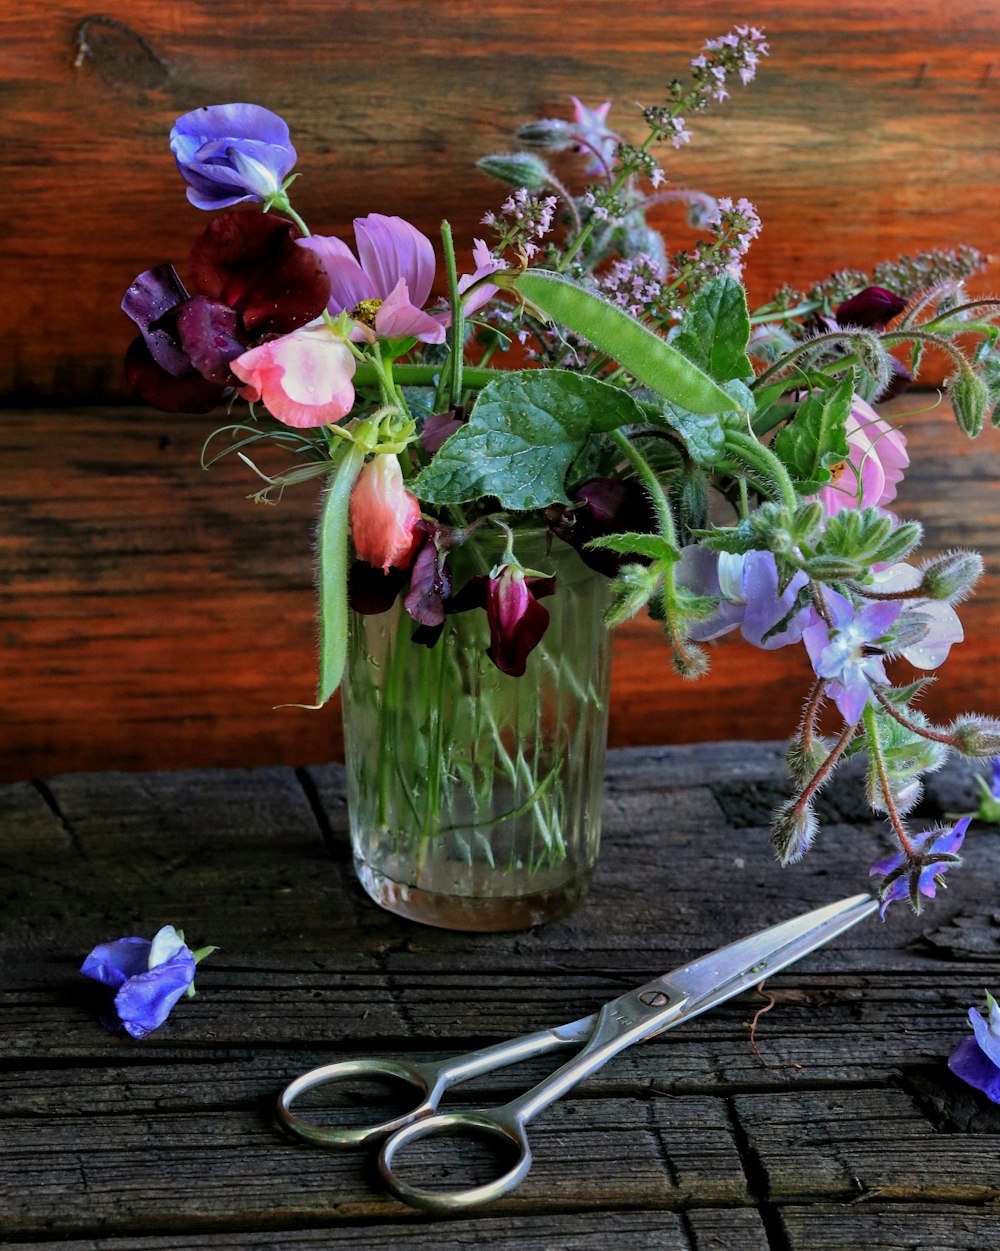 a vase filled with flowers next to a pair of scissors